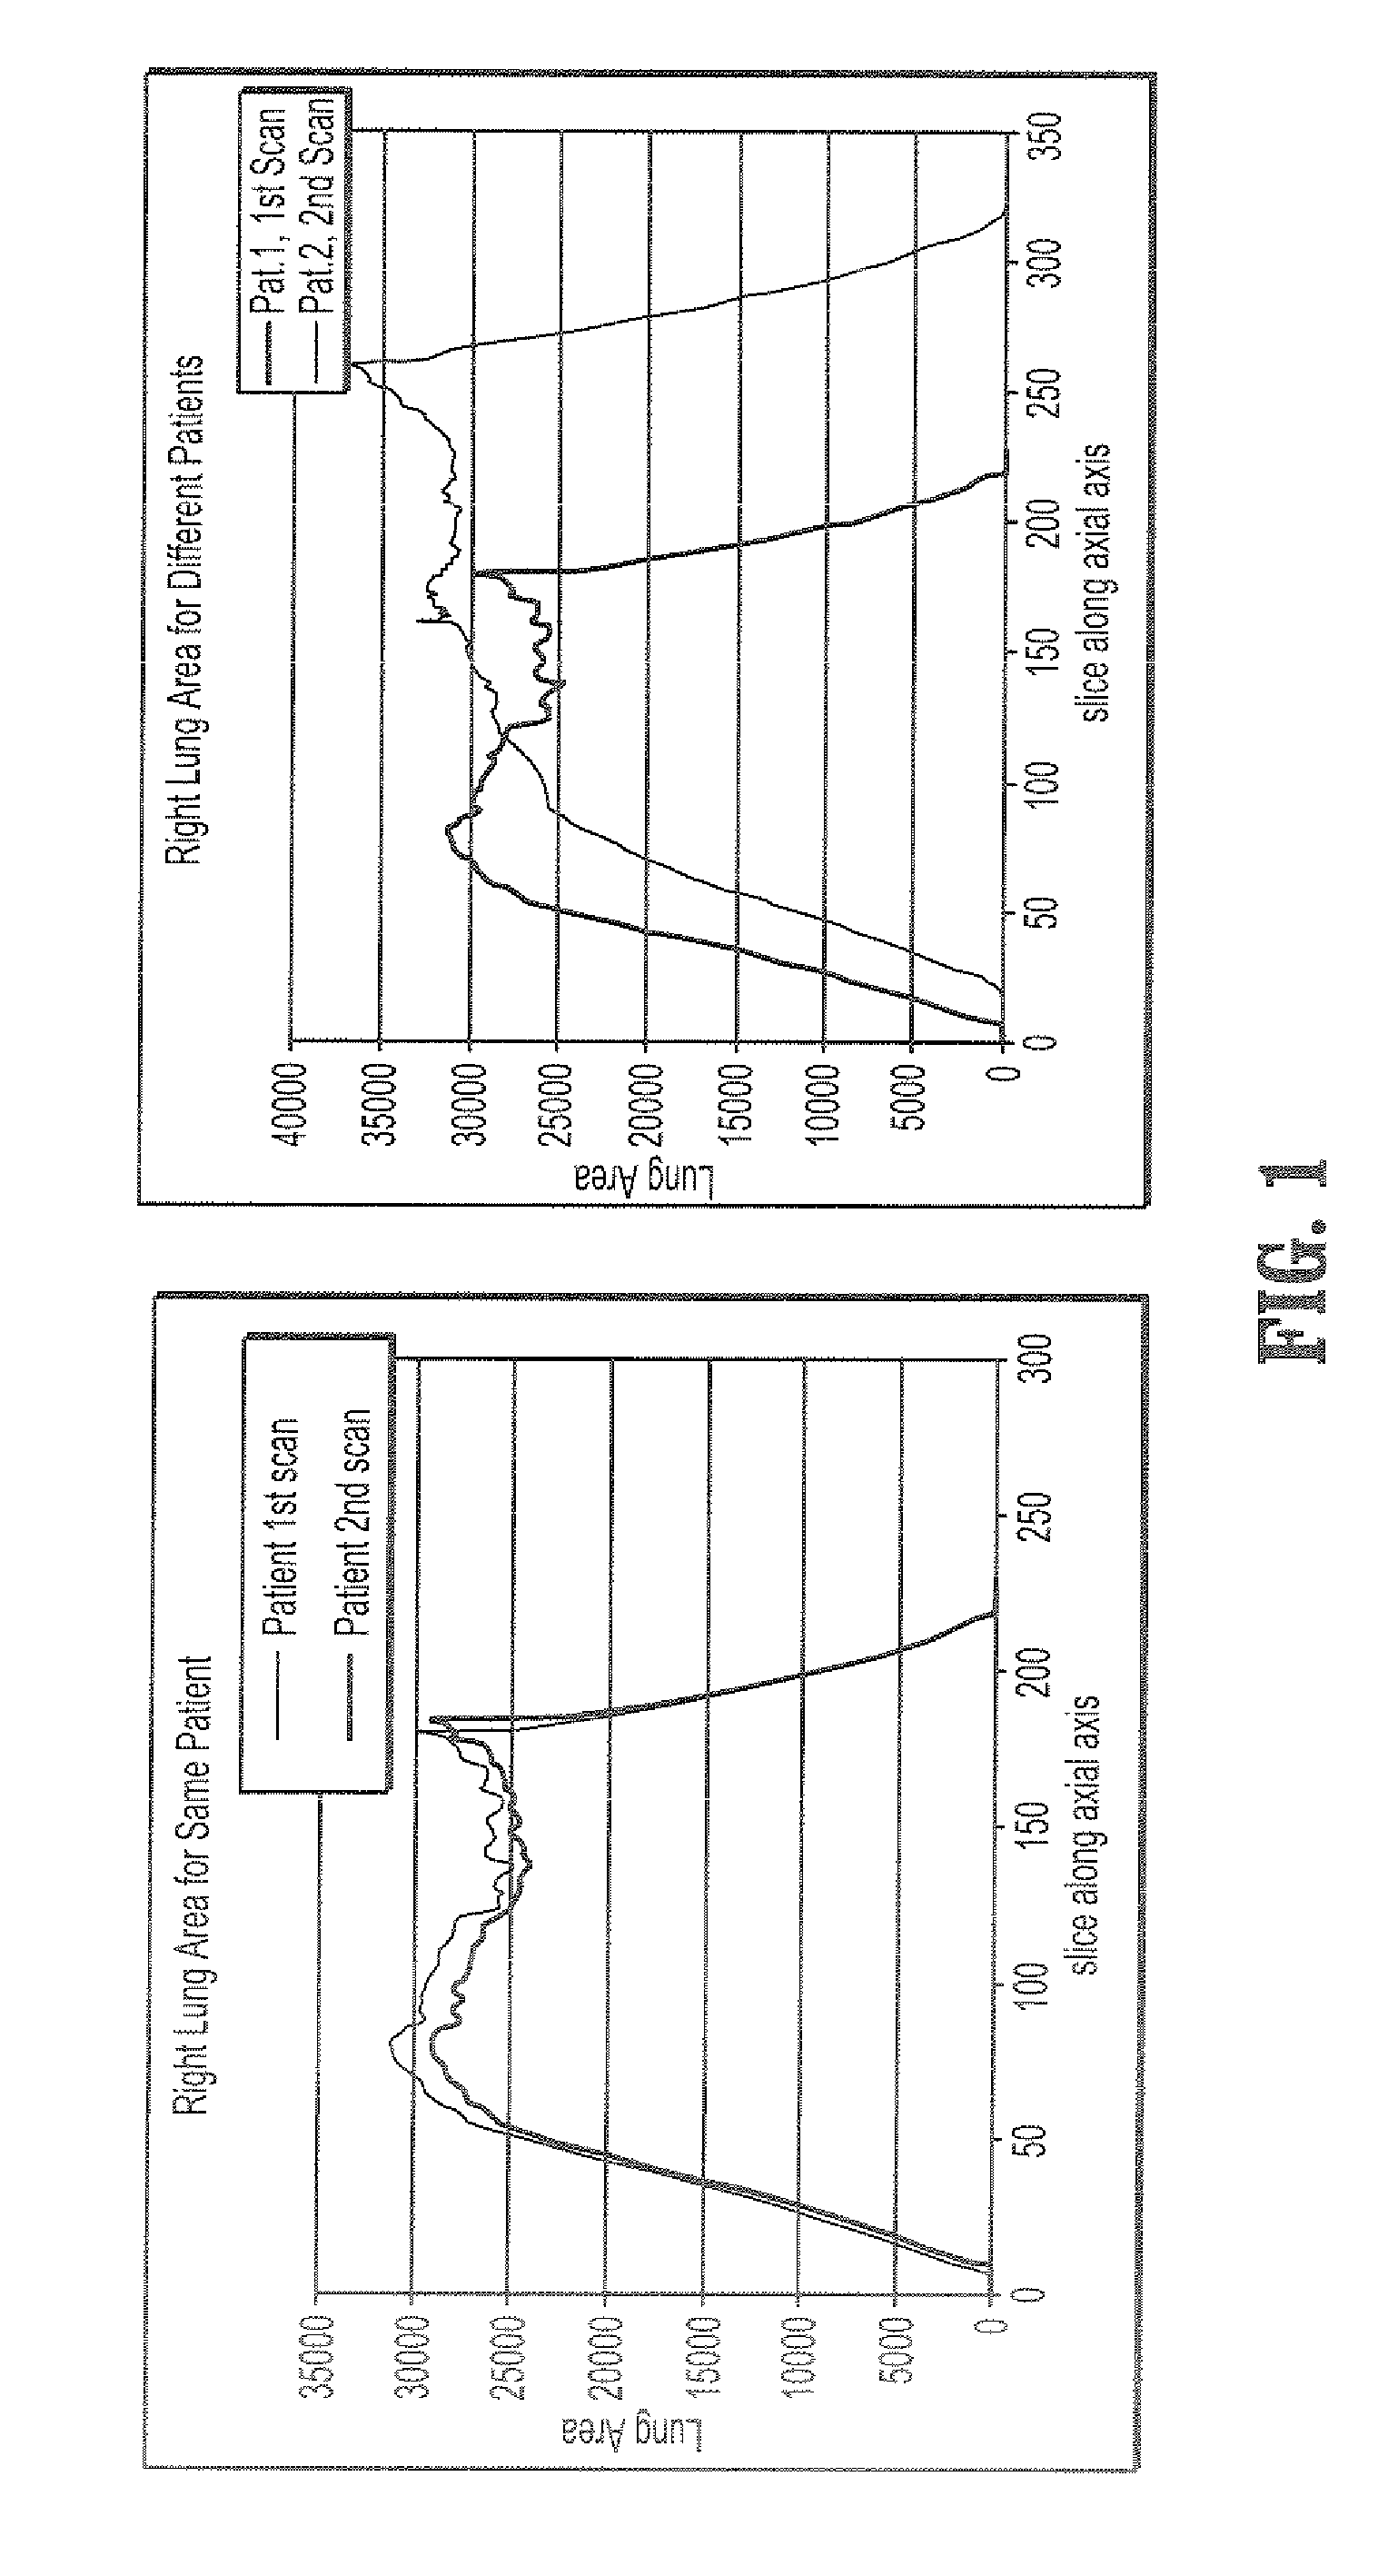 System and Method For Image-Based Tree Matching And Registration